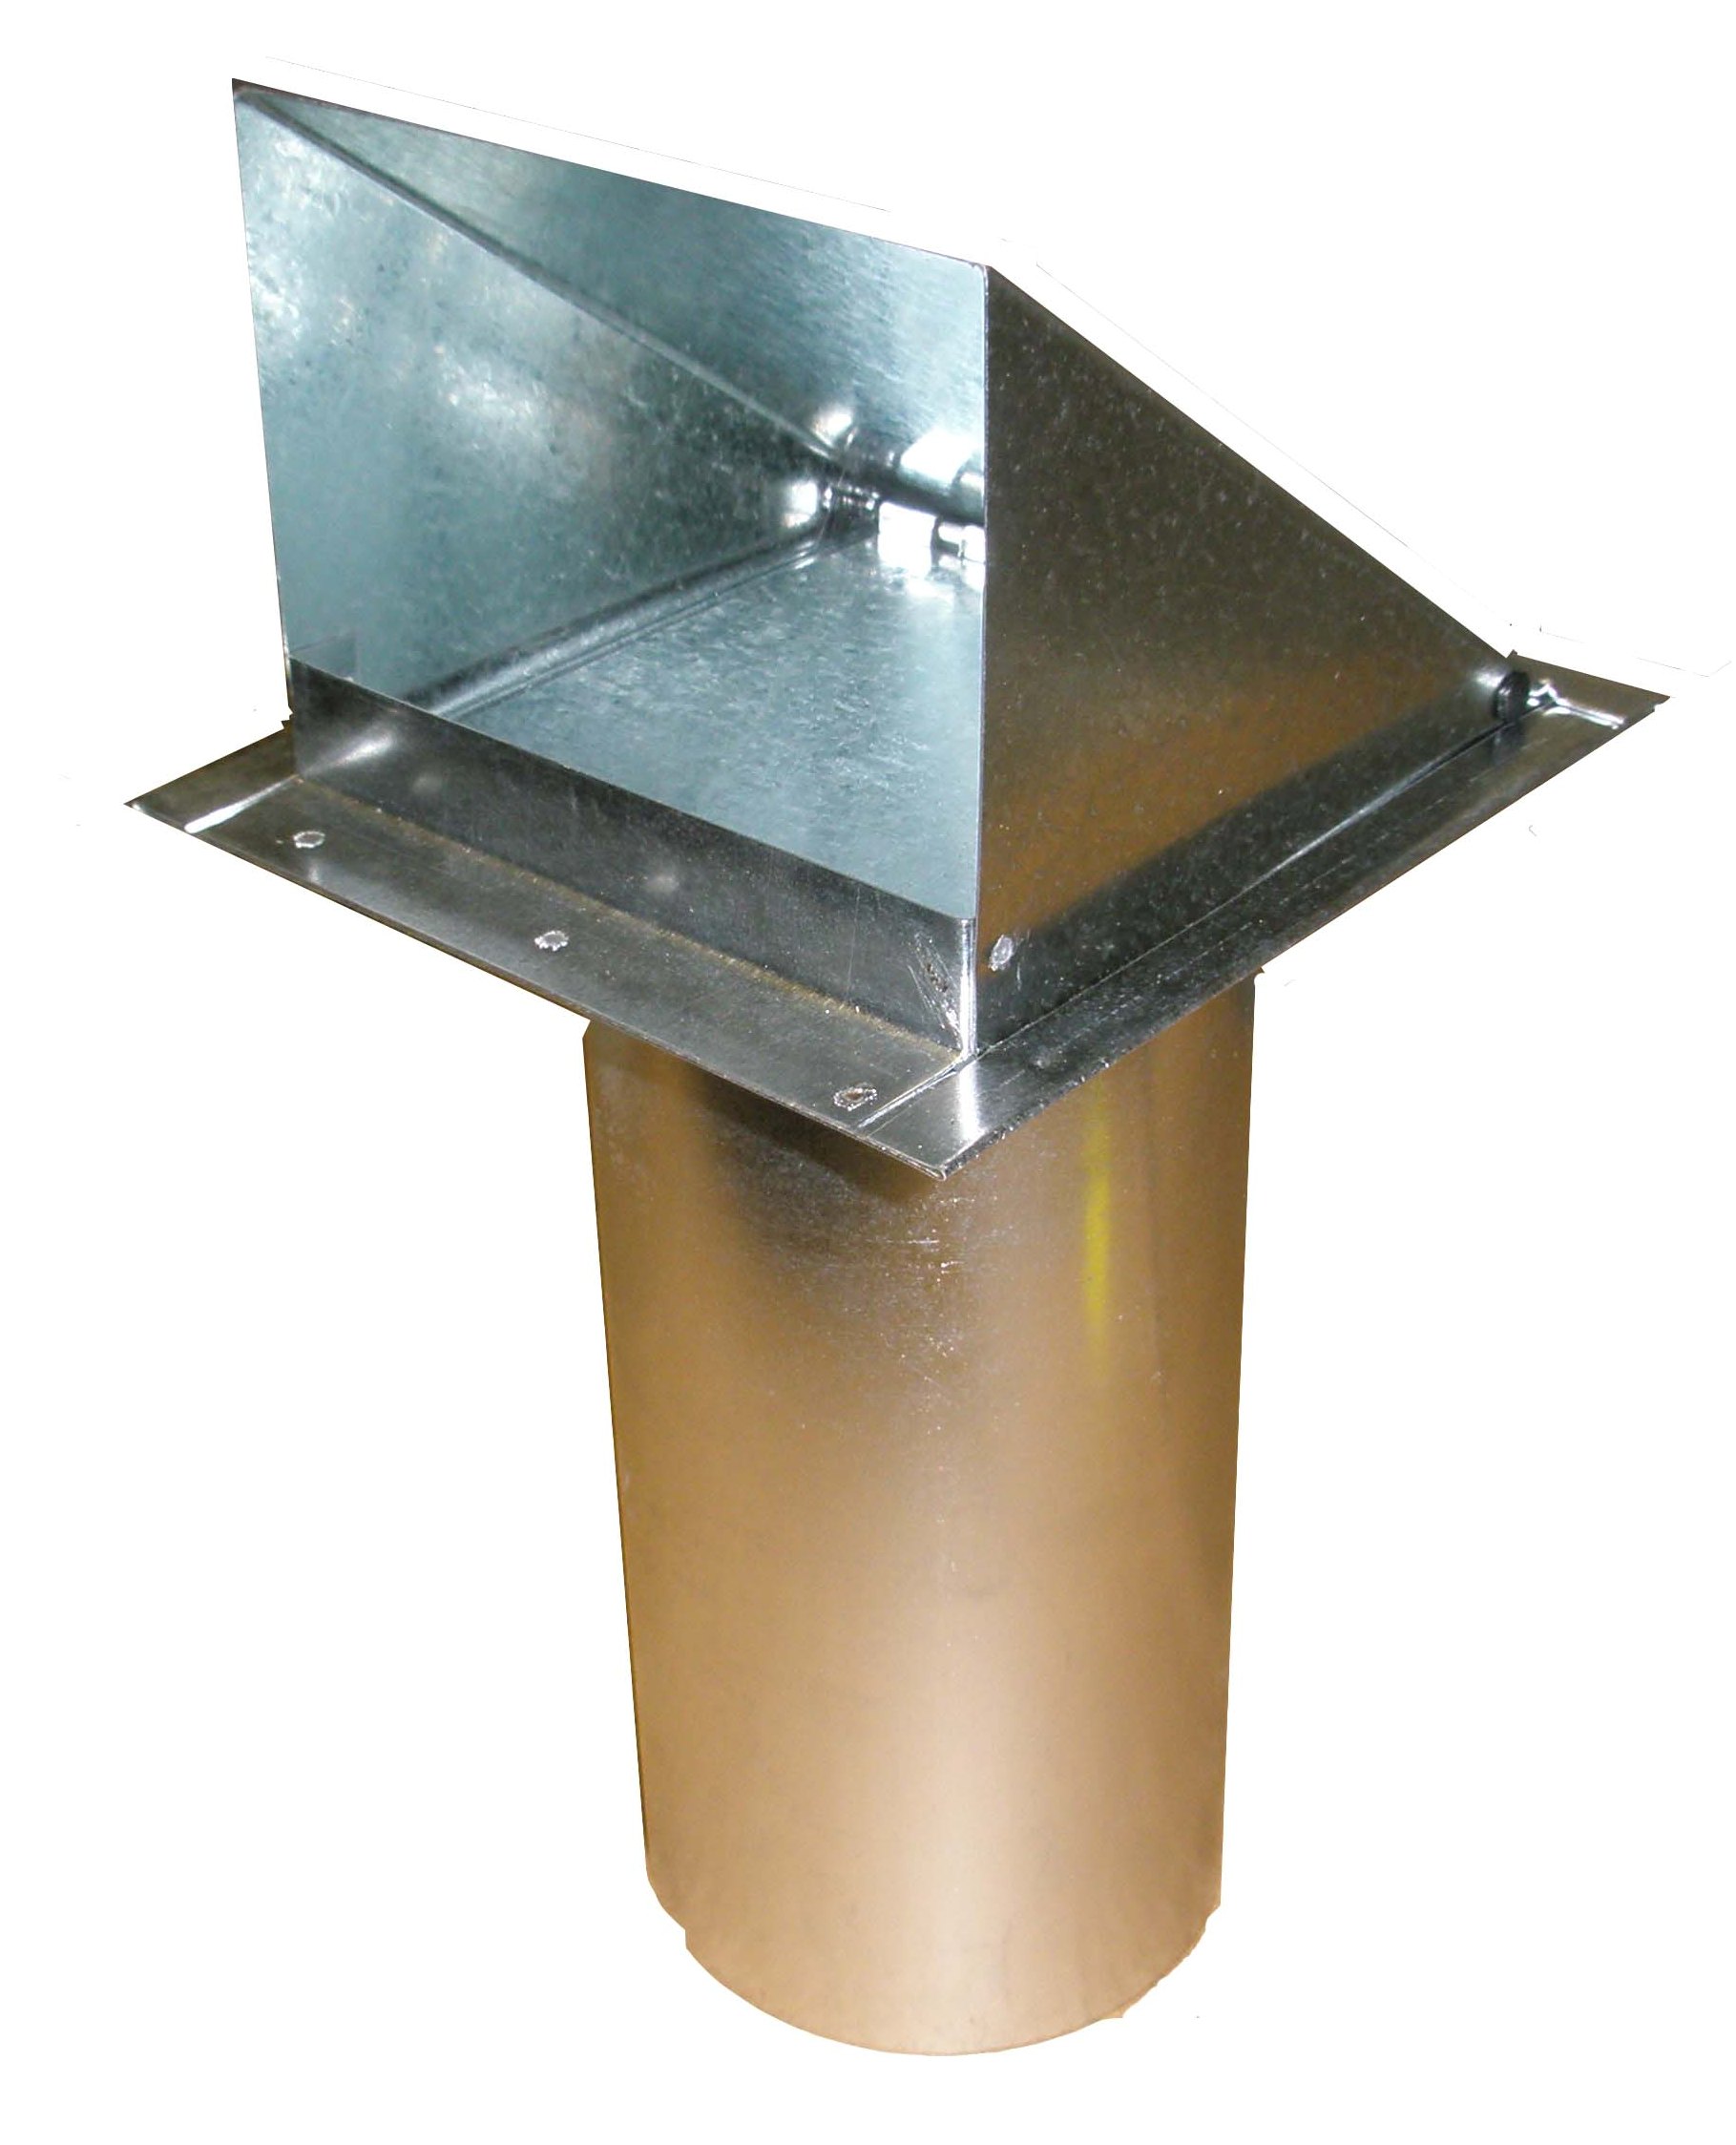 heavy metal wind blocking side wall exhaust vent cover